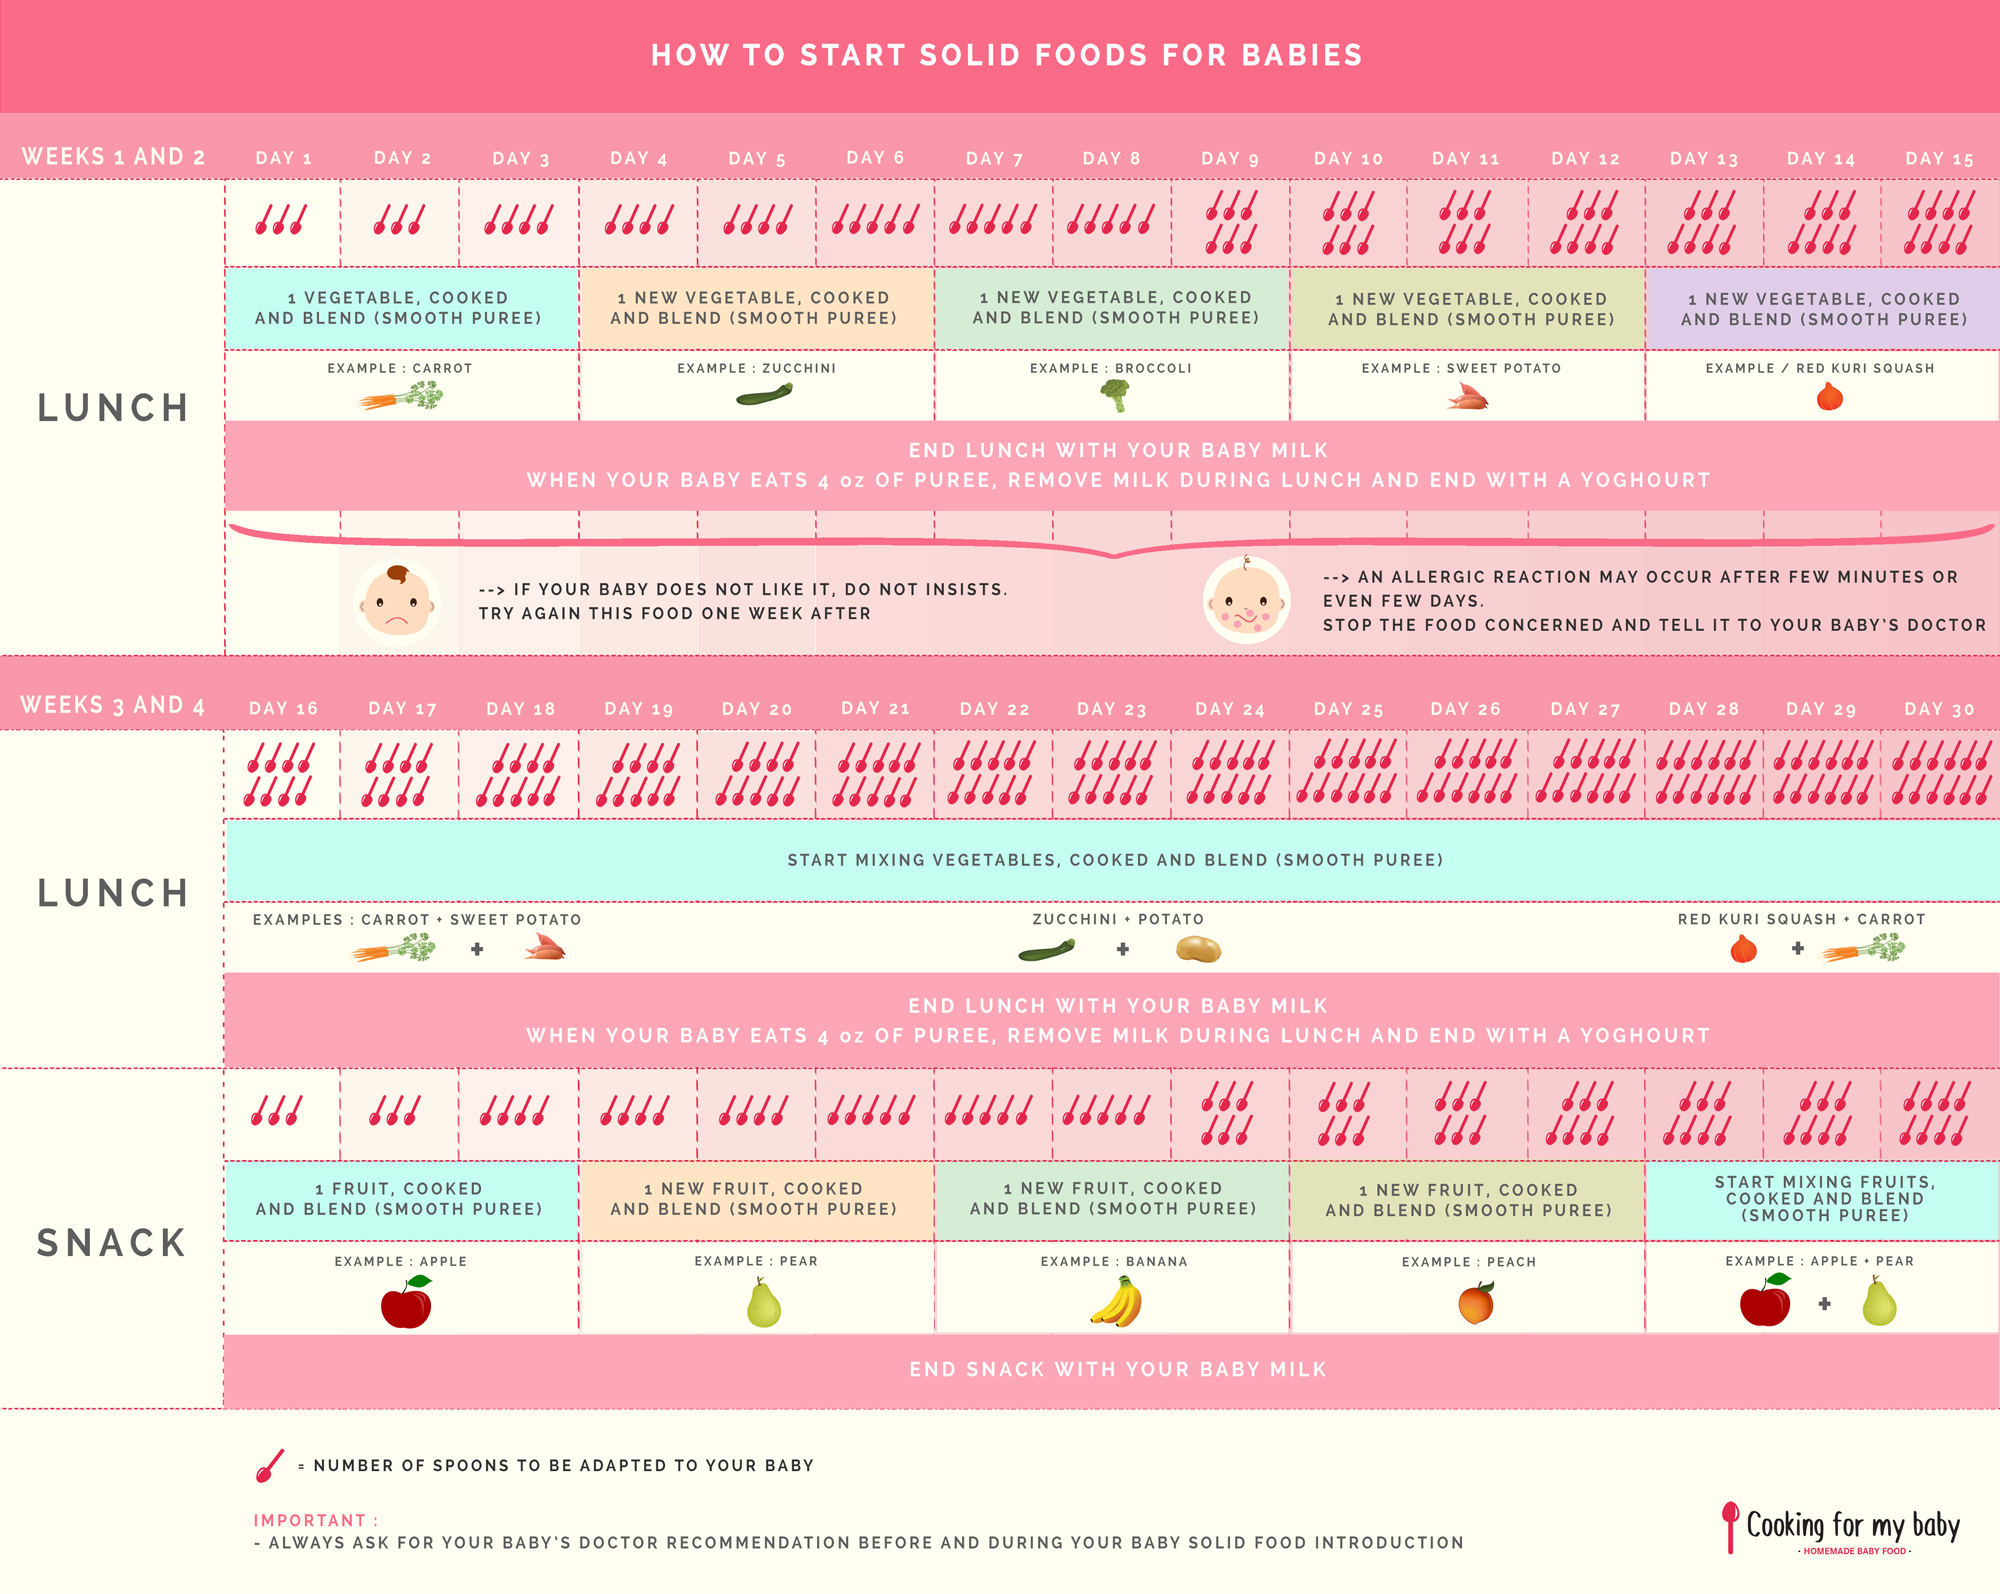 How to start solid foods for babies (30-day schedule)